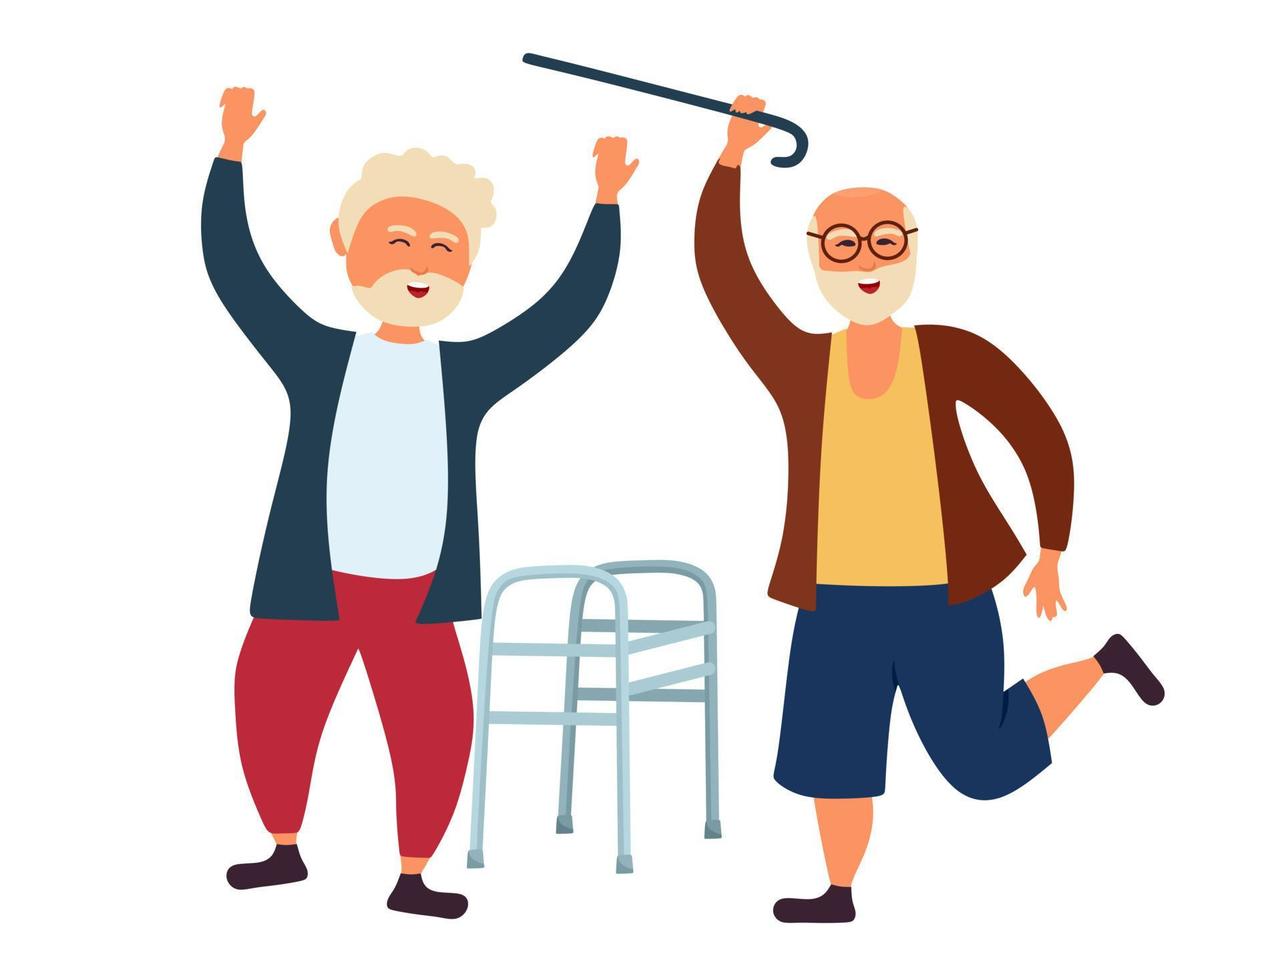 Grandpa's old people are dancing throwing away a walking stick and a walker. The older man is having fun. Vector illustration isolated on a white background.